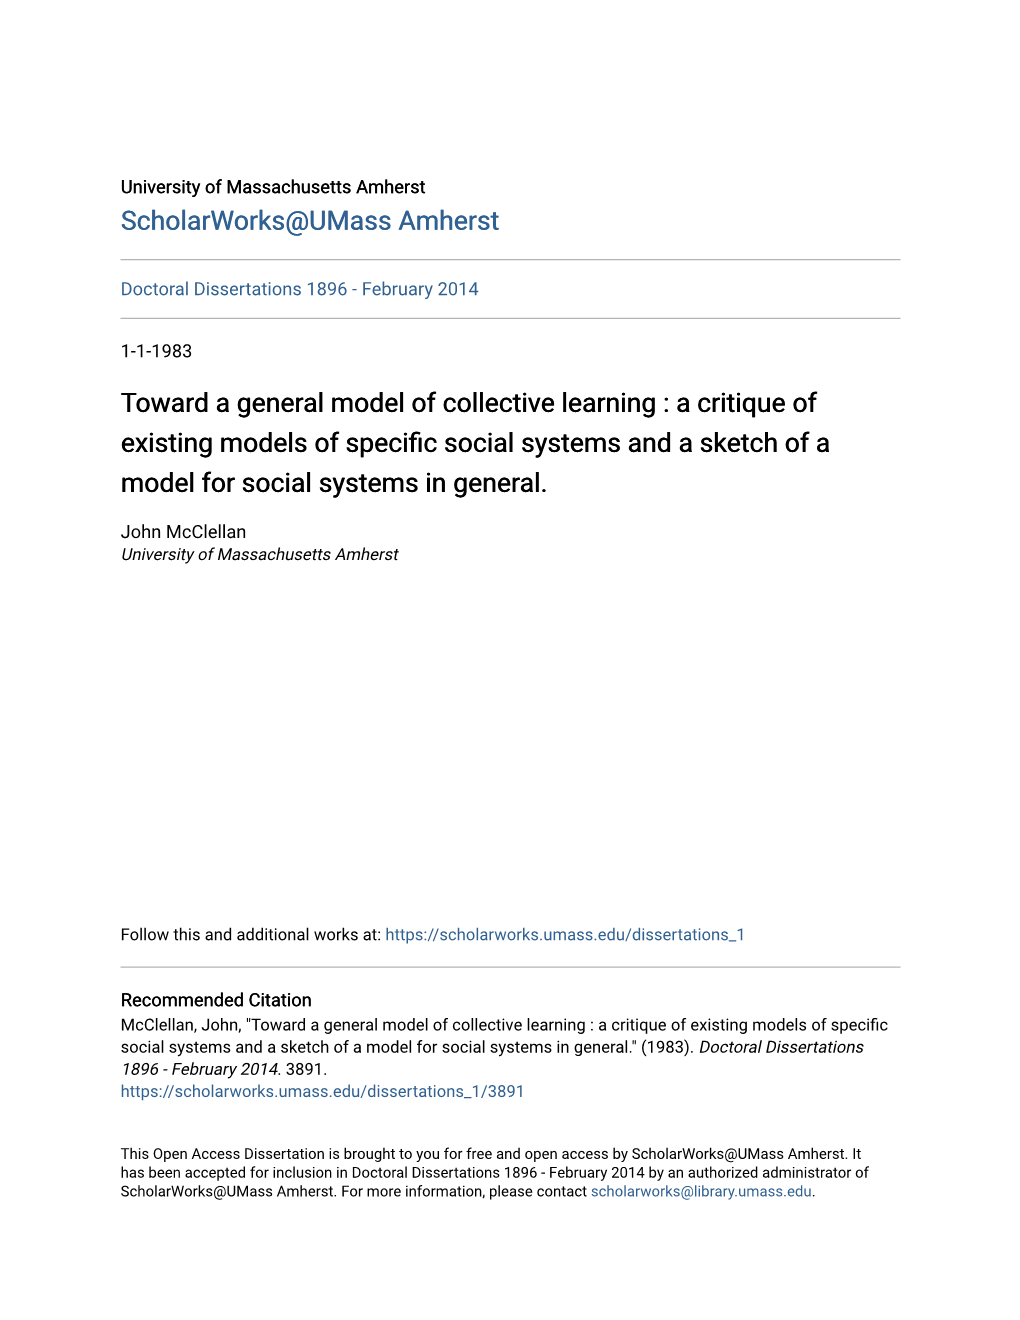 Toward a General Model of Collective Learning : a Critique of Existing Models of Specific Social Systems and a Sketch of a Model for Social Systems in General